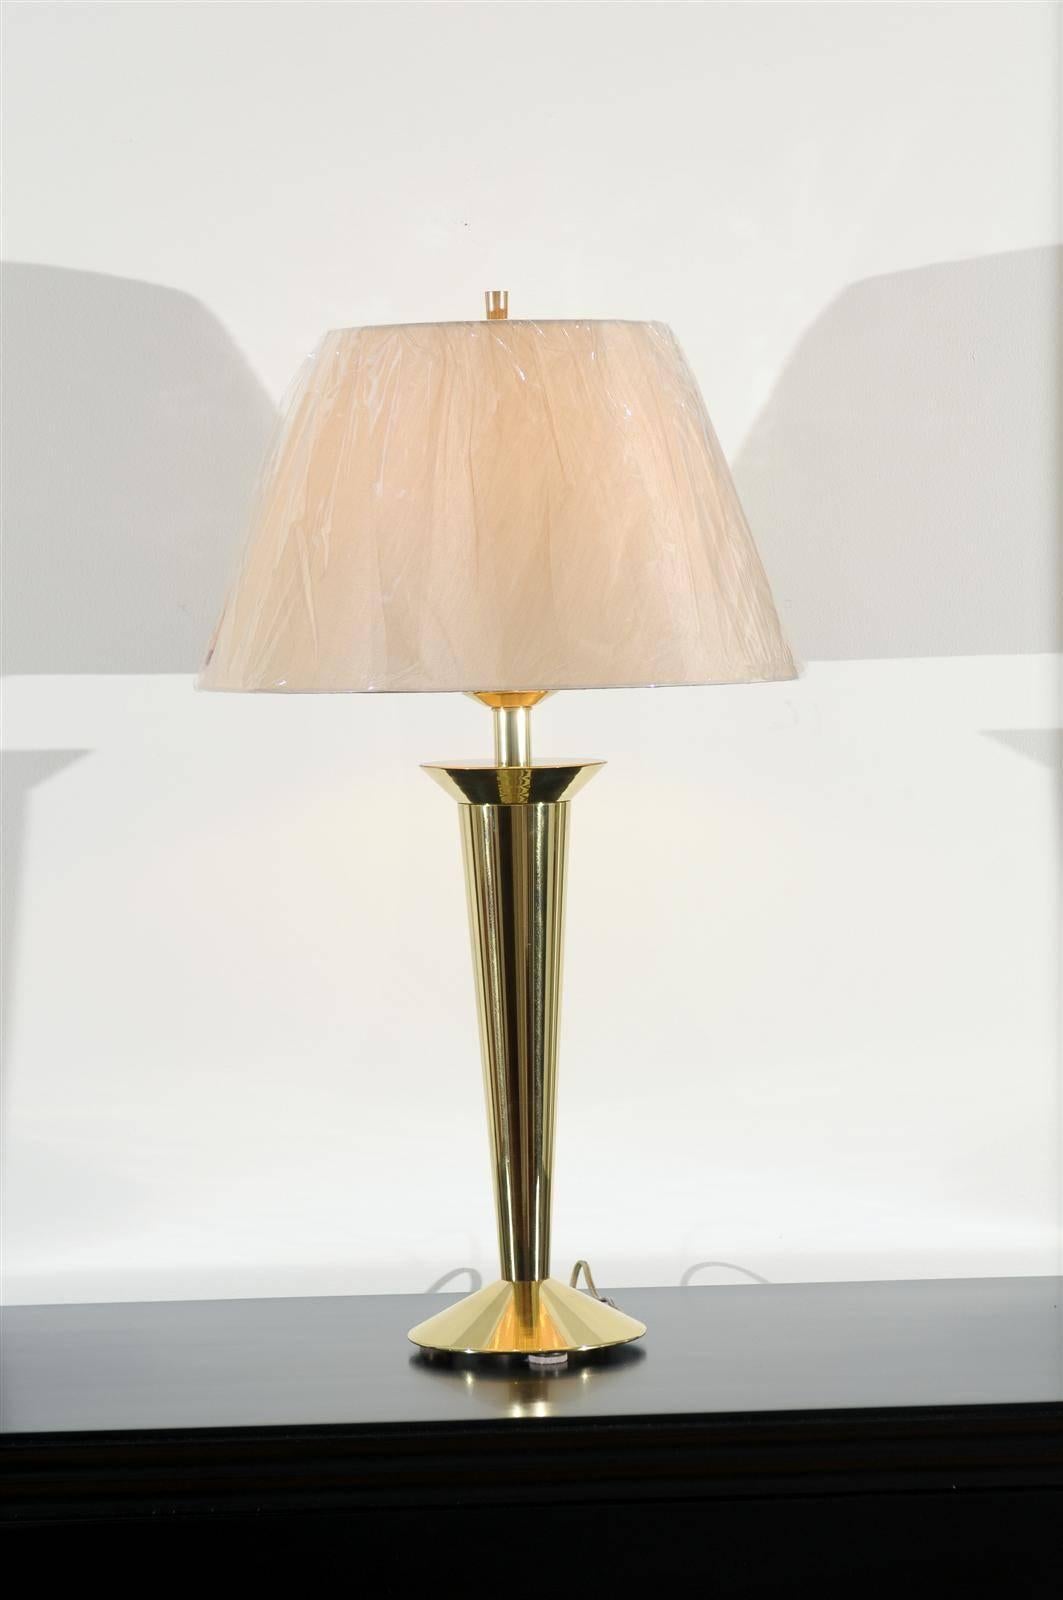 A stunning pair of vintage modern lamps, circa 1980. An updated interpretation of a Classic Art Deco lighting form. Solid brass casing over a cast metal structure. Heavy, beautifully made pieces. Exquisite jewelry! Excellent Restored Condition.